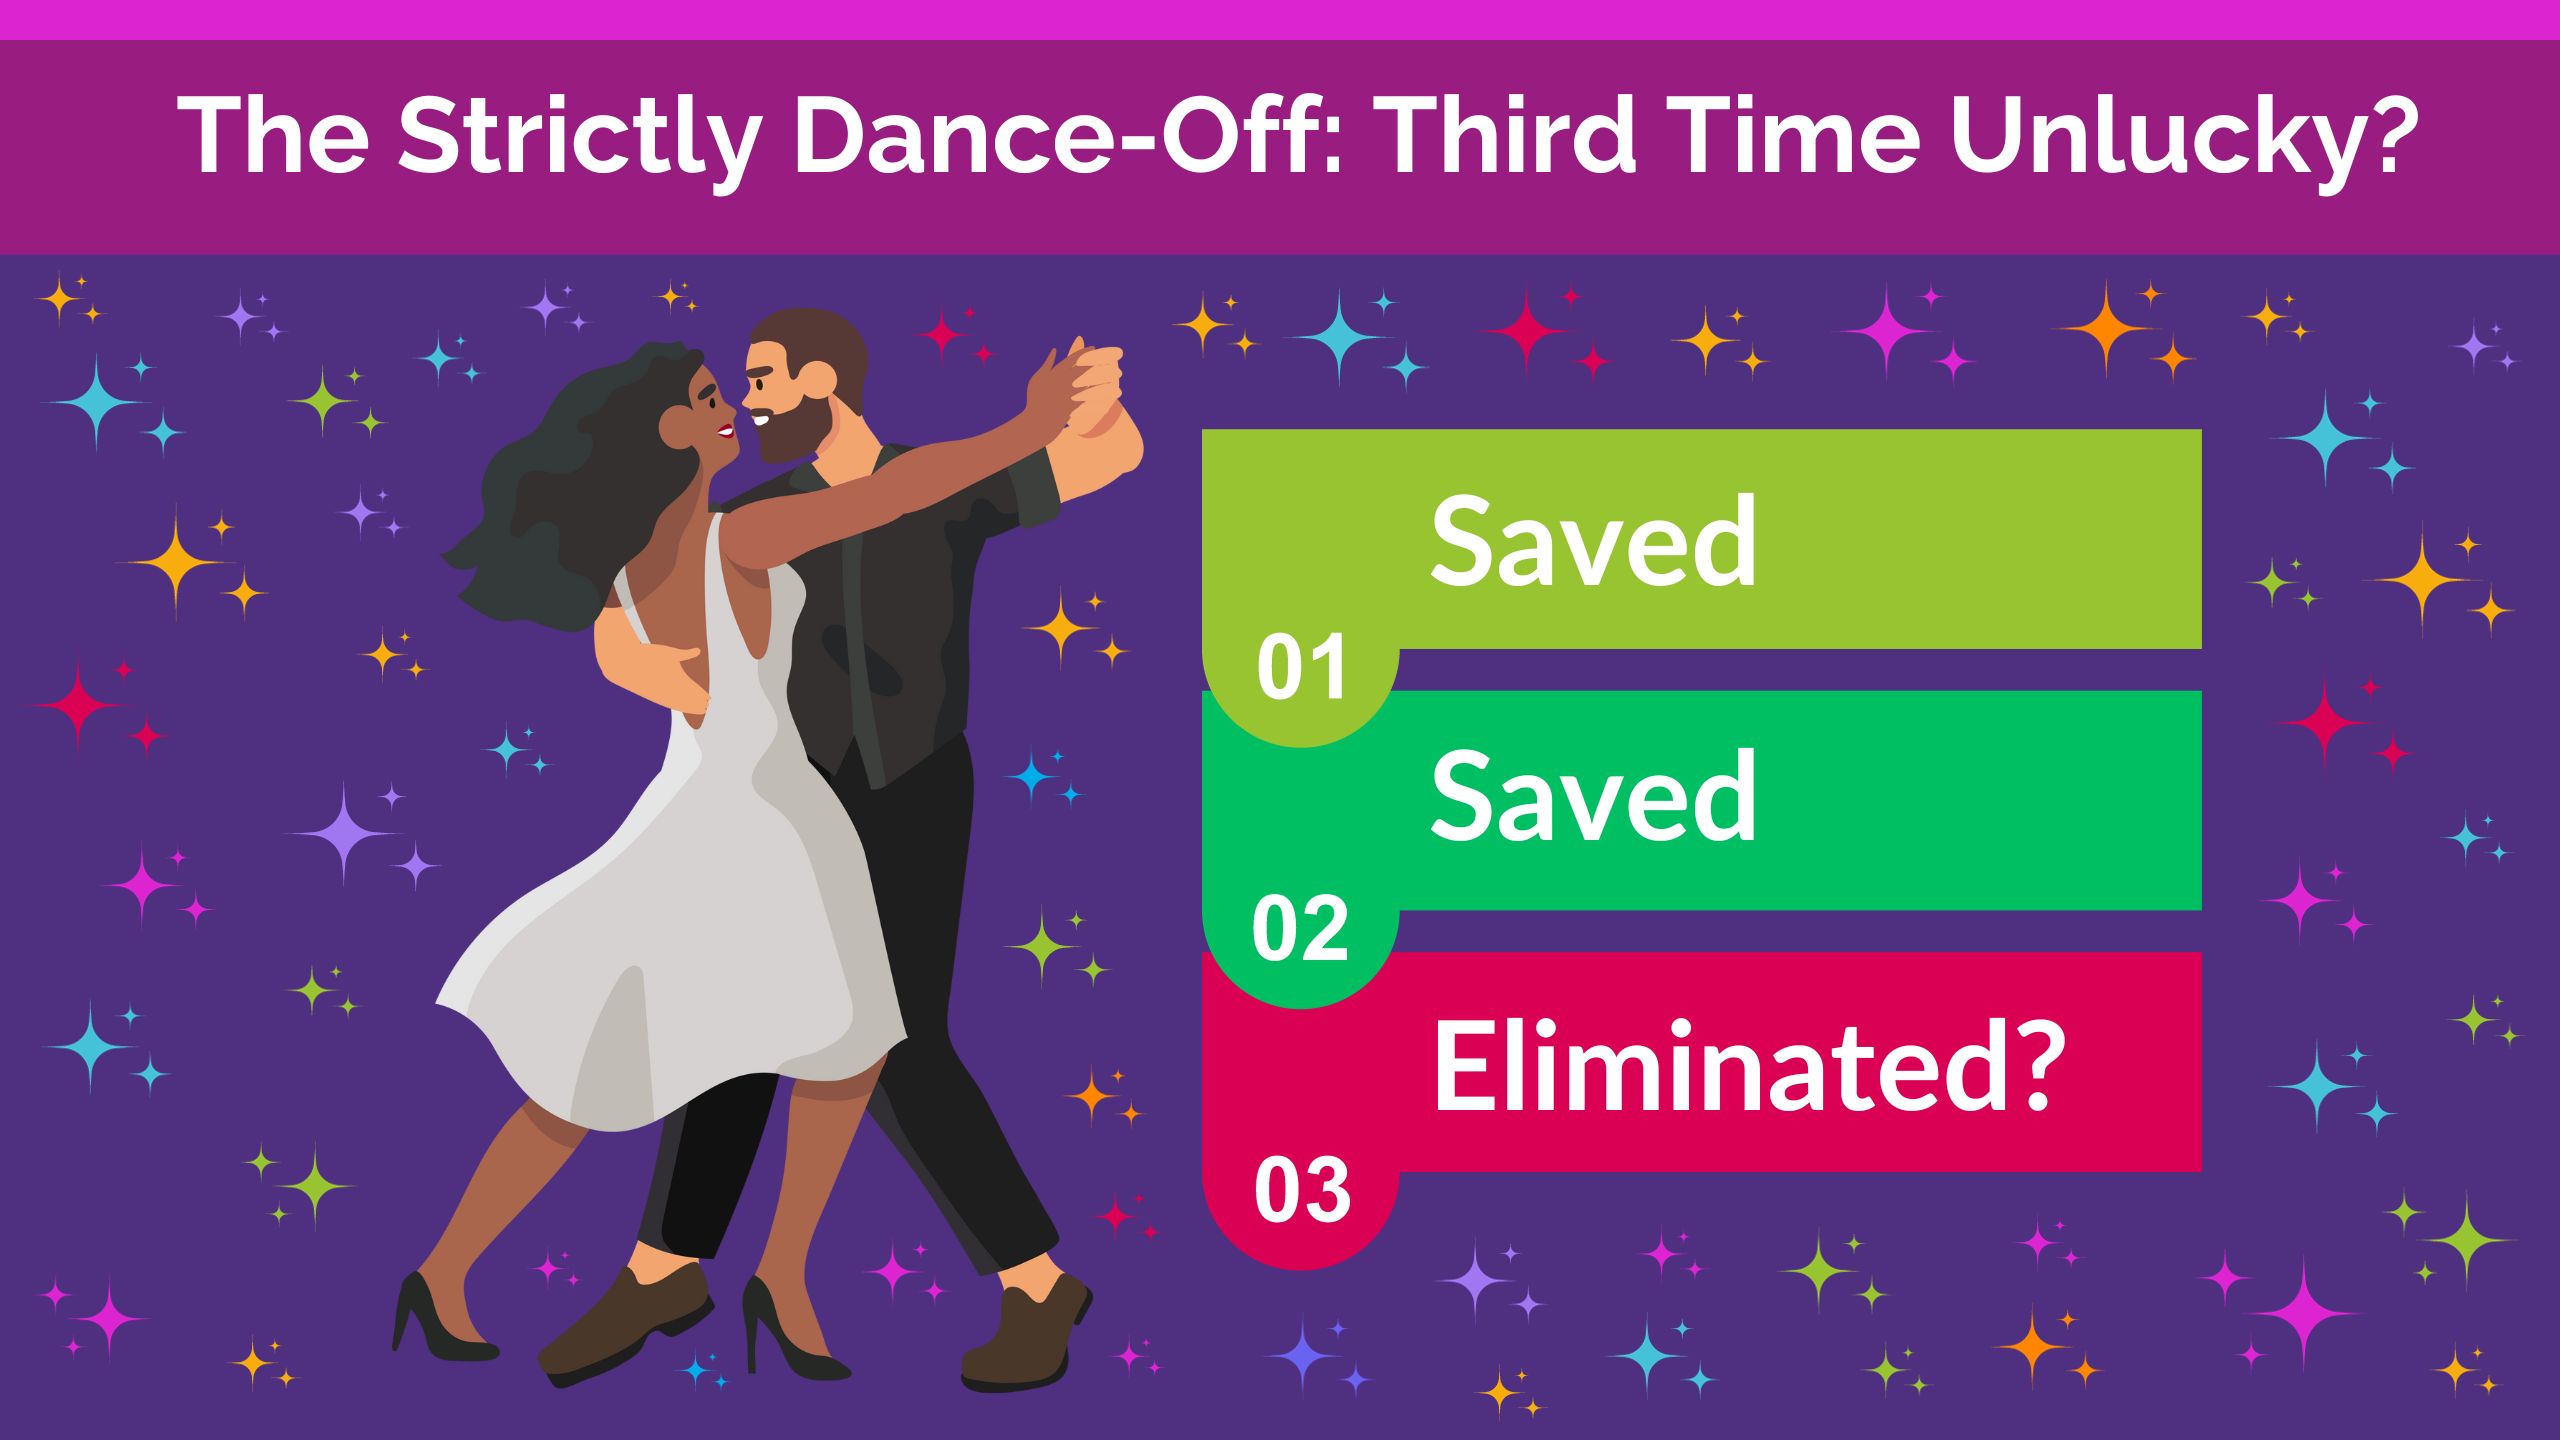 Strictly come dancing - Third Time Unlucky graphic